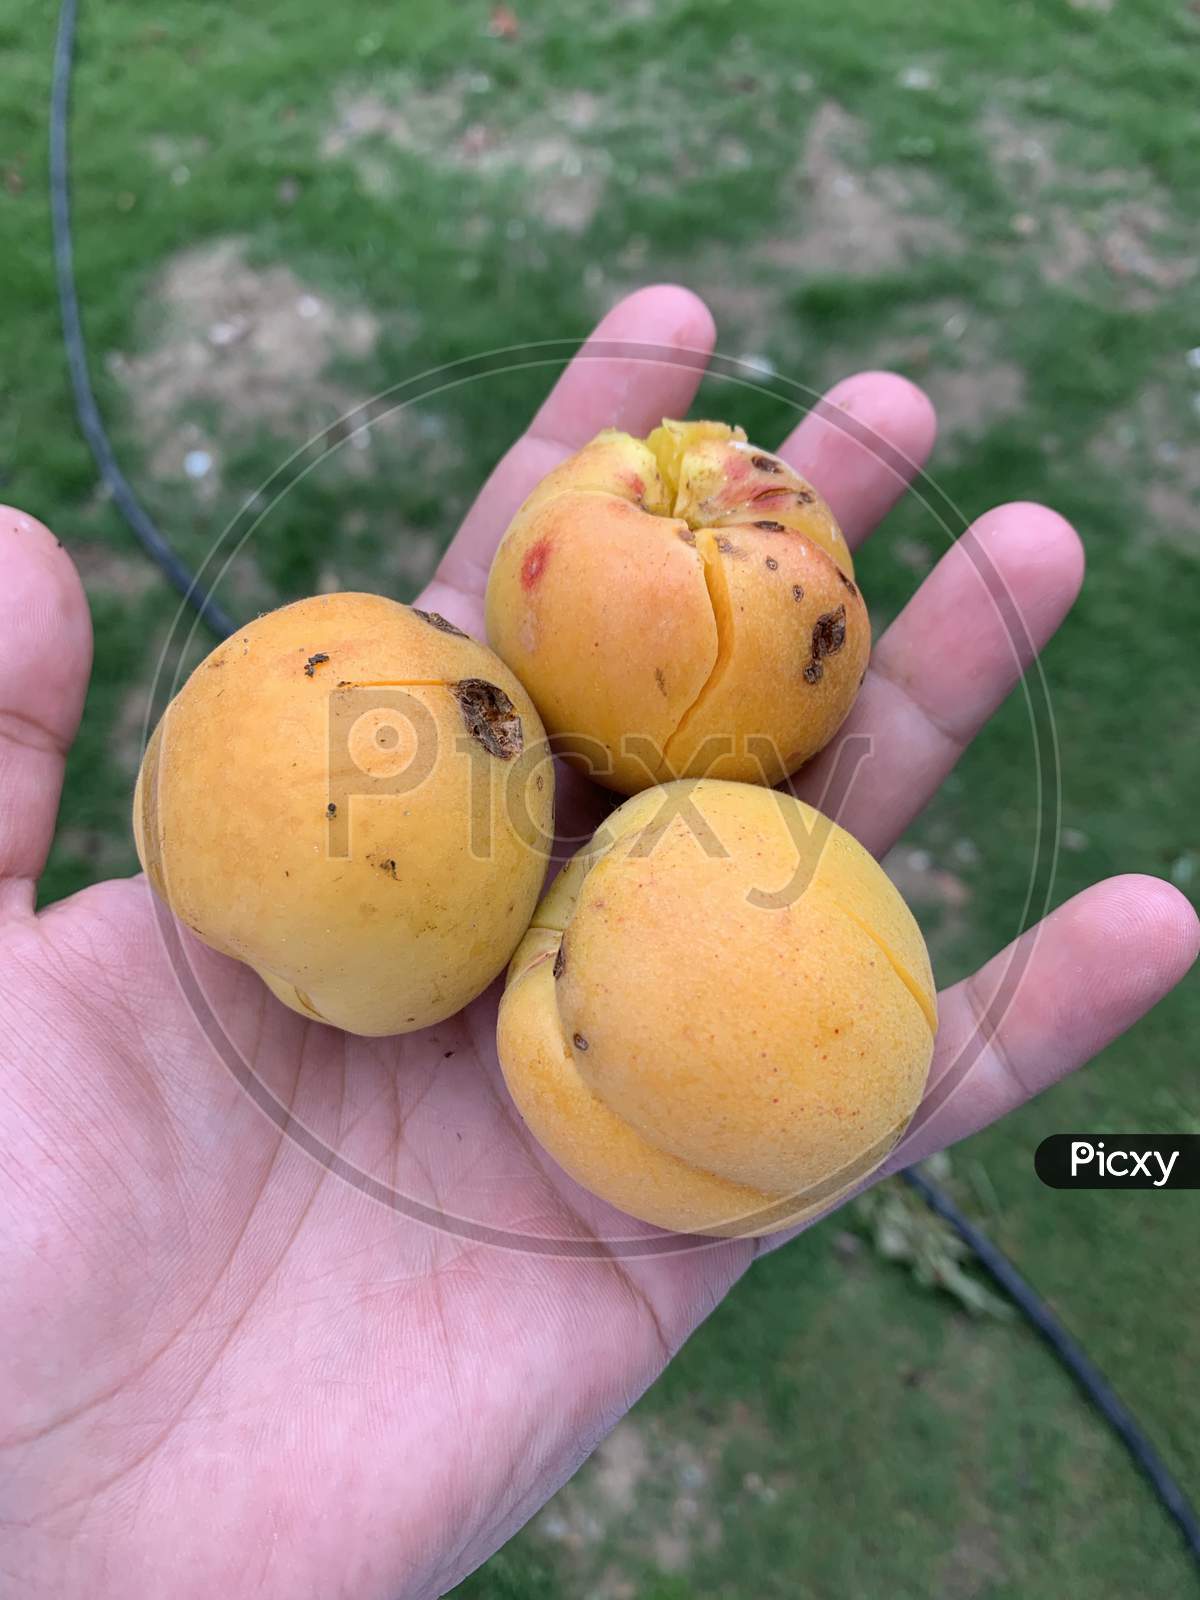 Three Apricots In The Male Hand